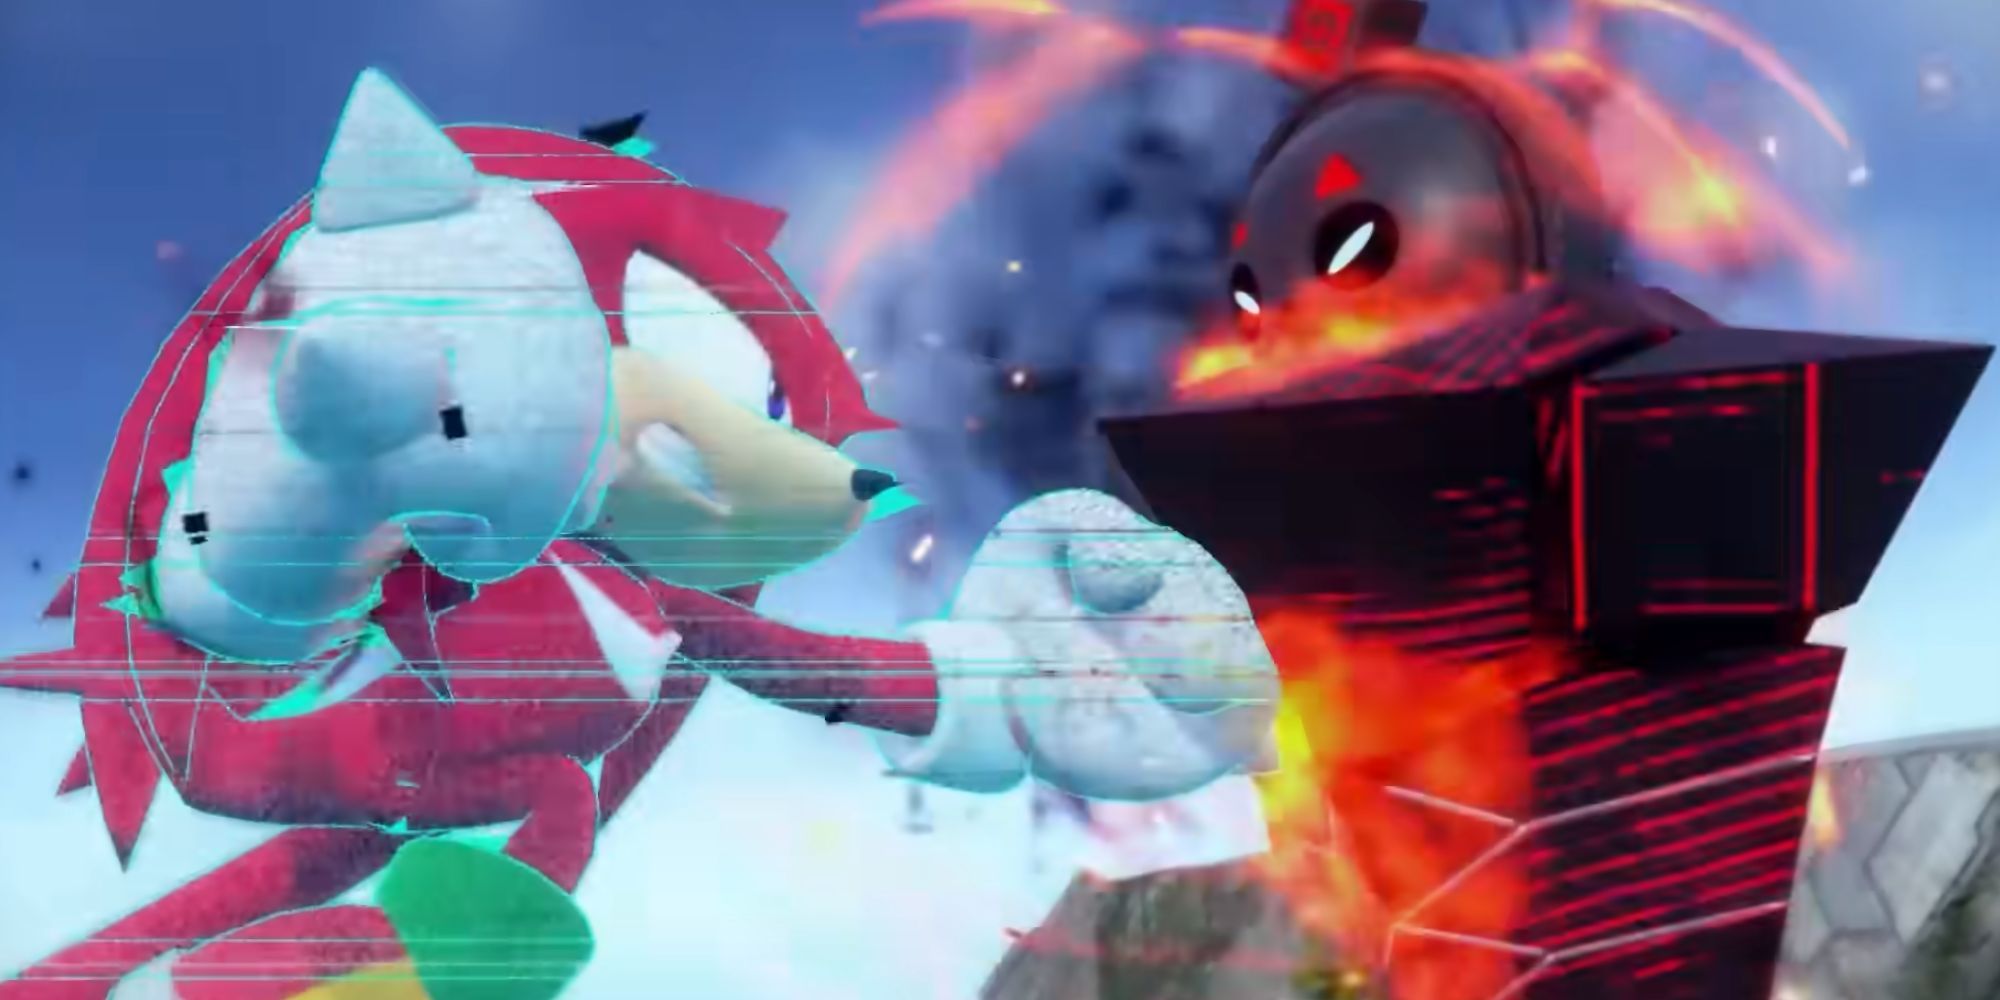 Knuckles uppercuts an enemy in Sonic Frontiers